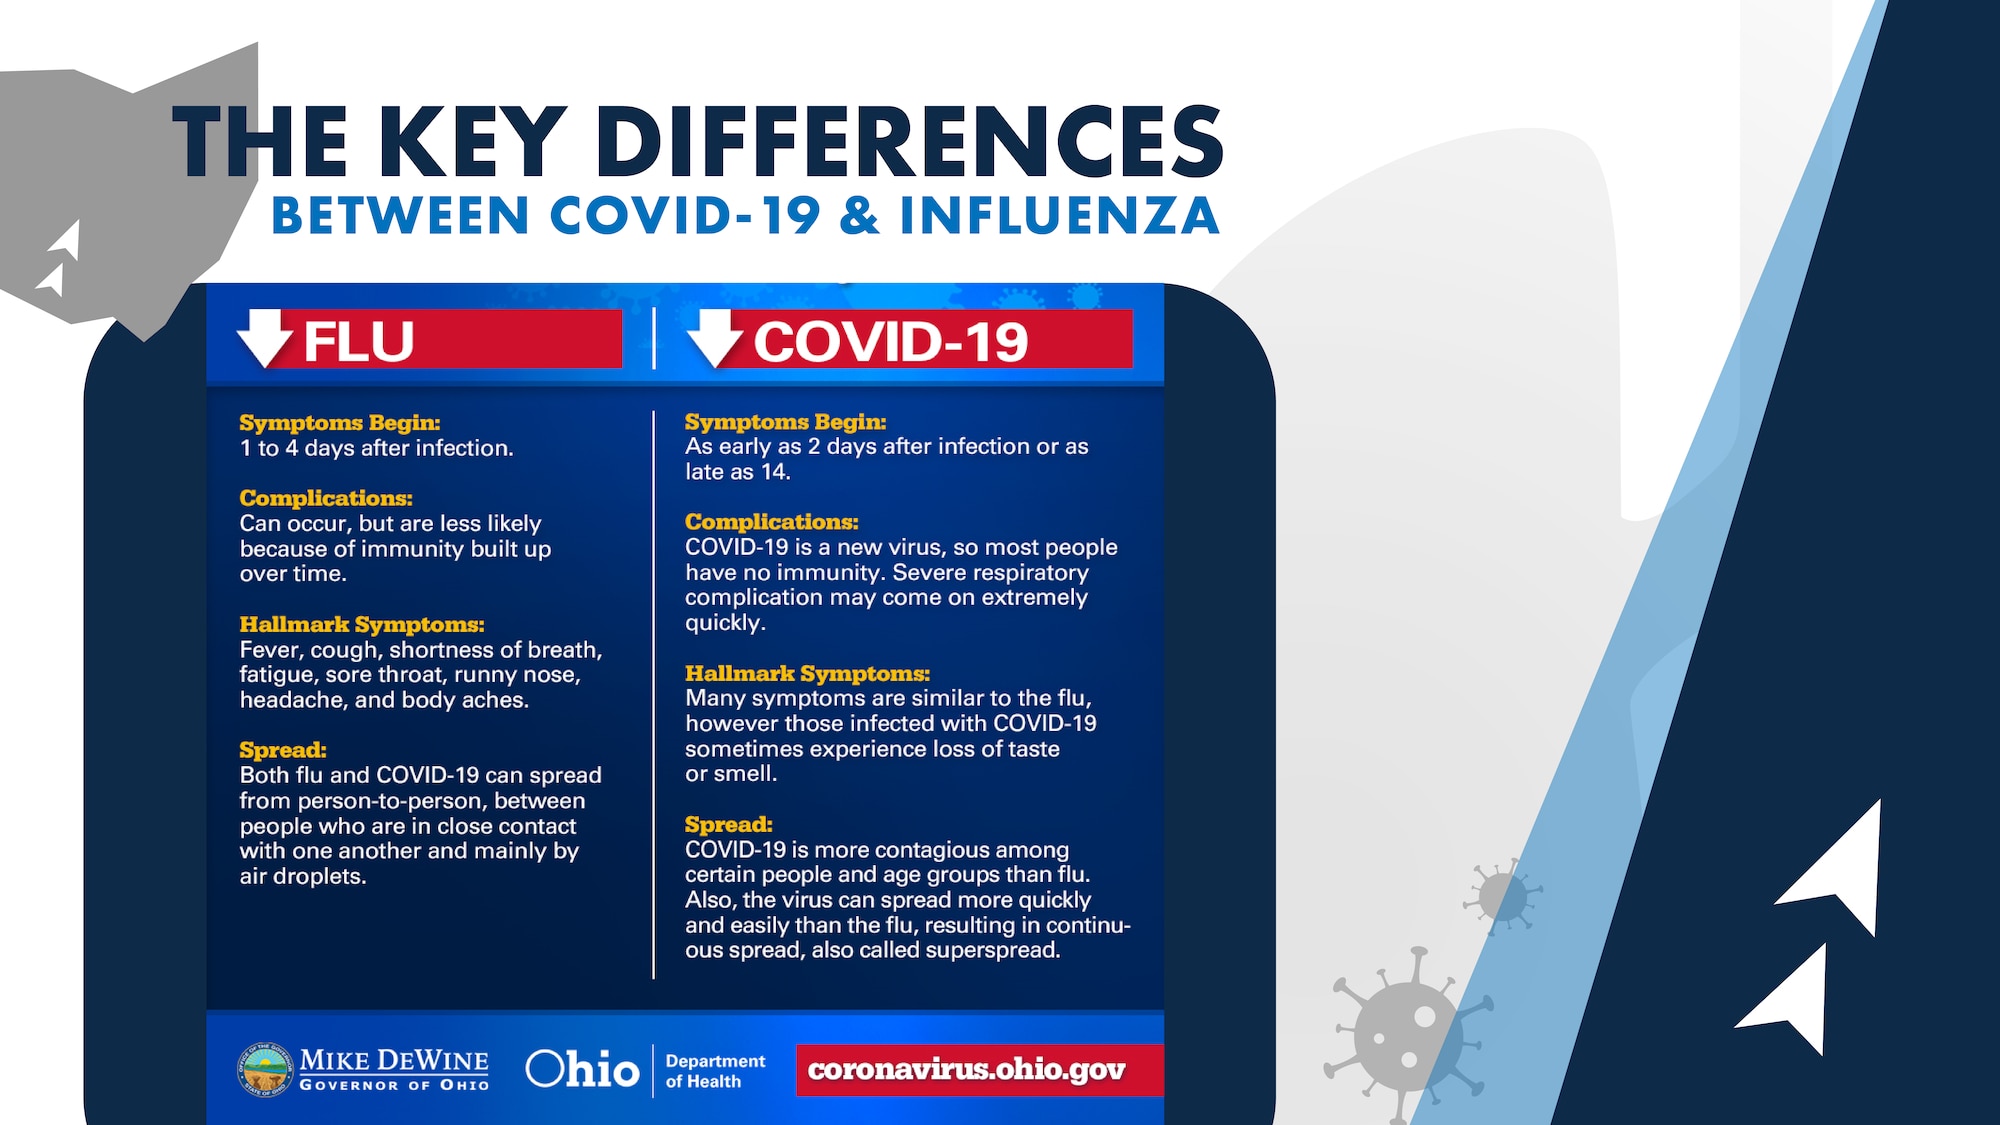 Key differences between COVID-19 and Influenza in accordance with Ohio Health Department Guidelines